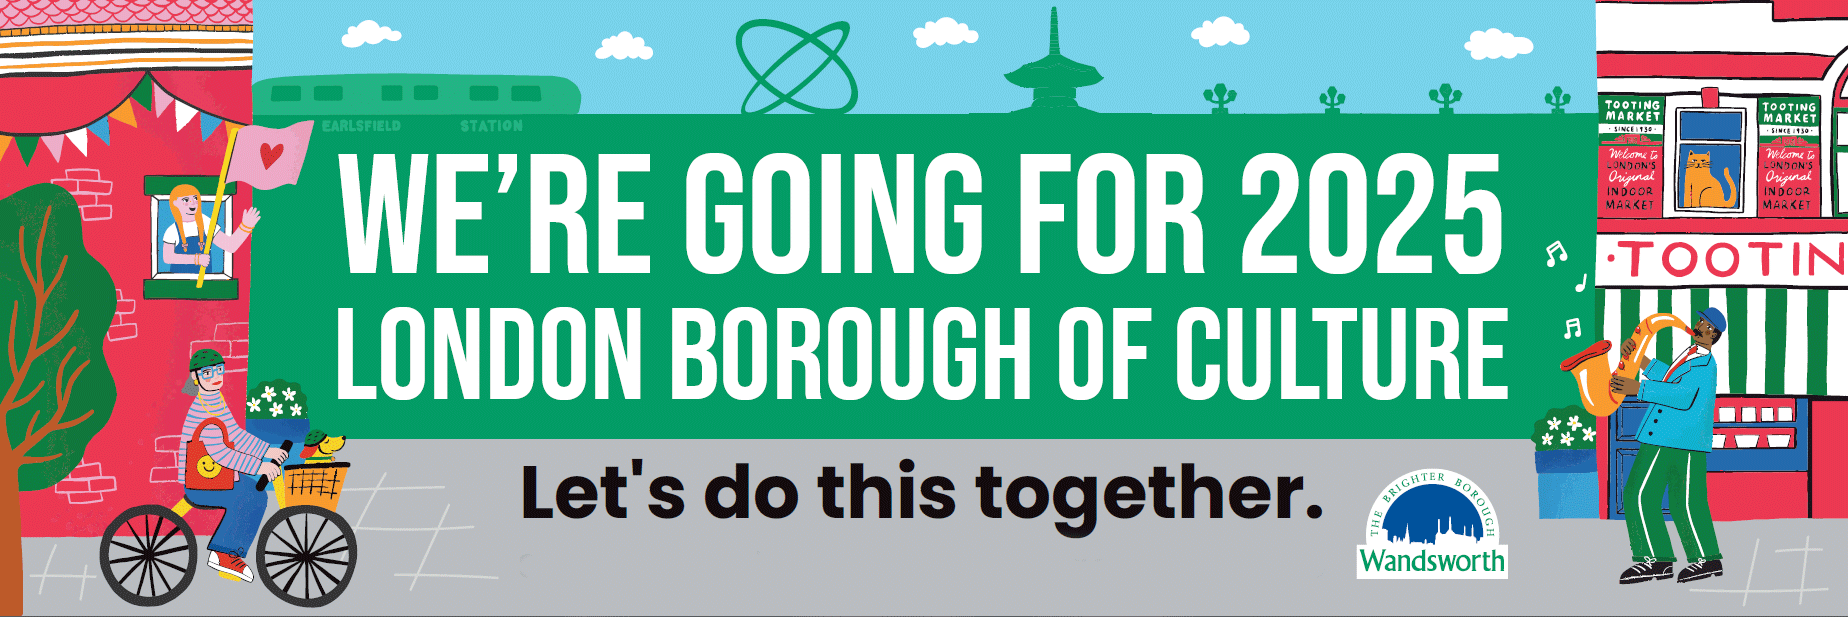 We're going for 2025 London Borough of Culture - Let's do this together.